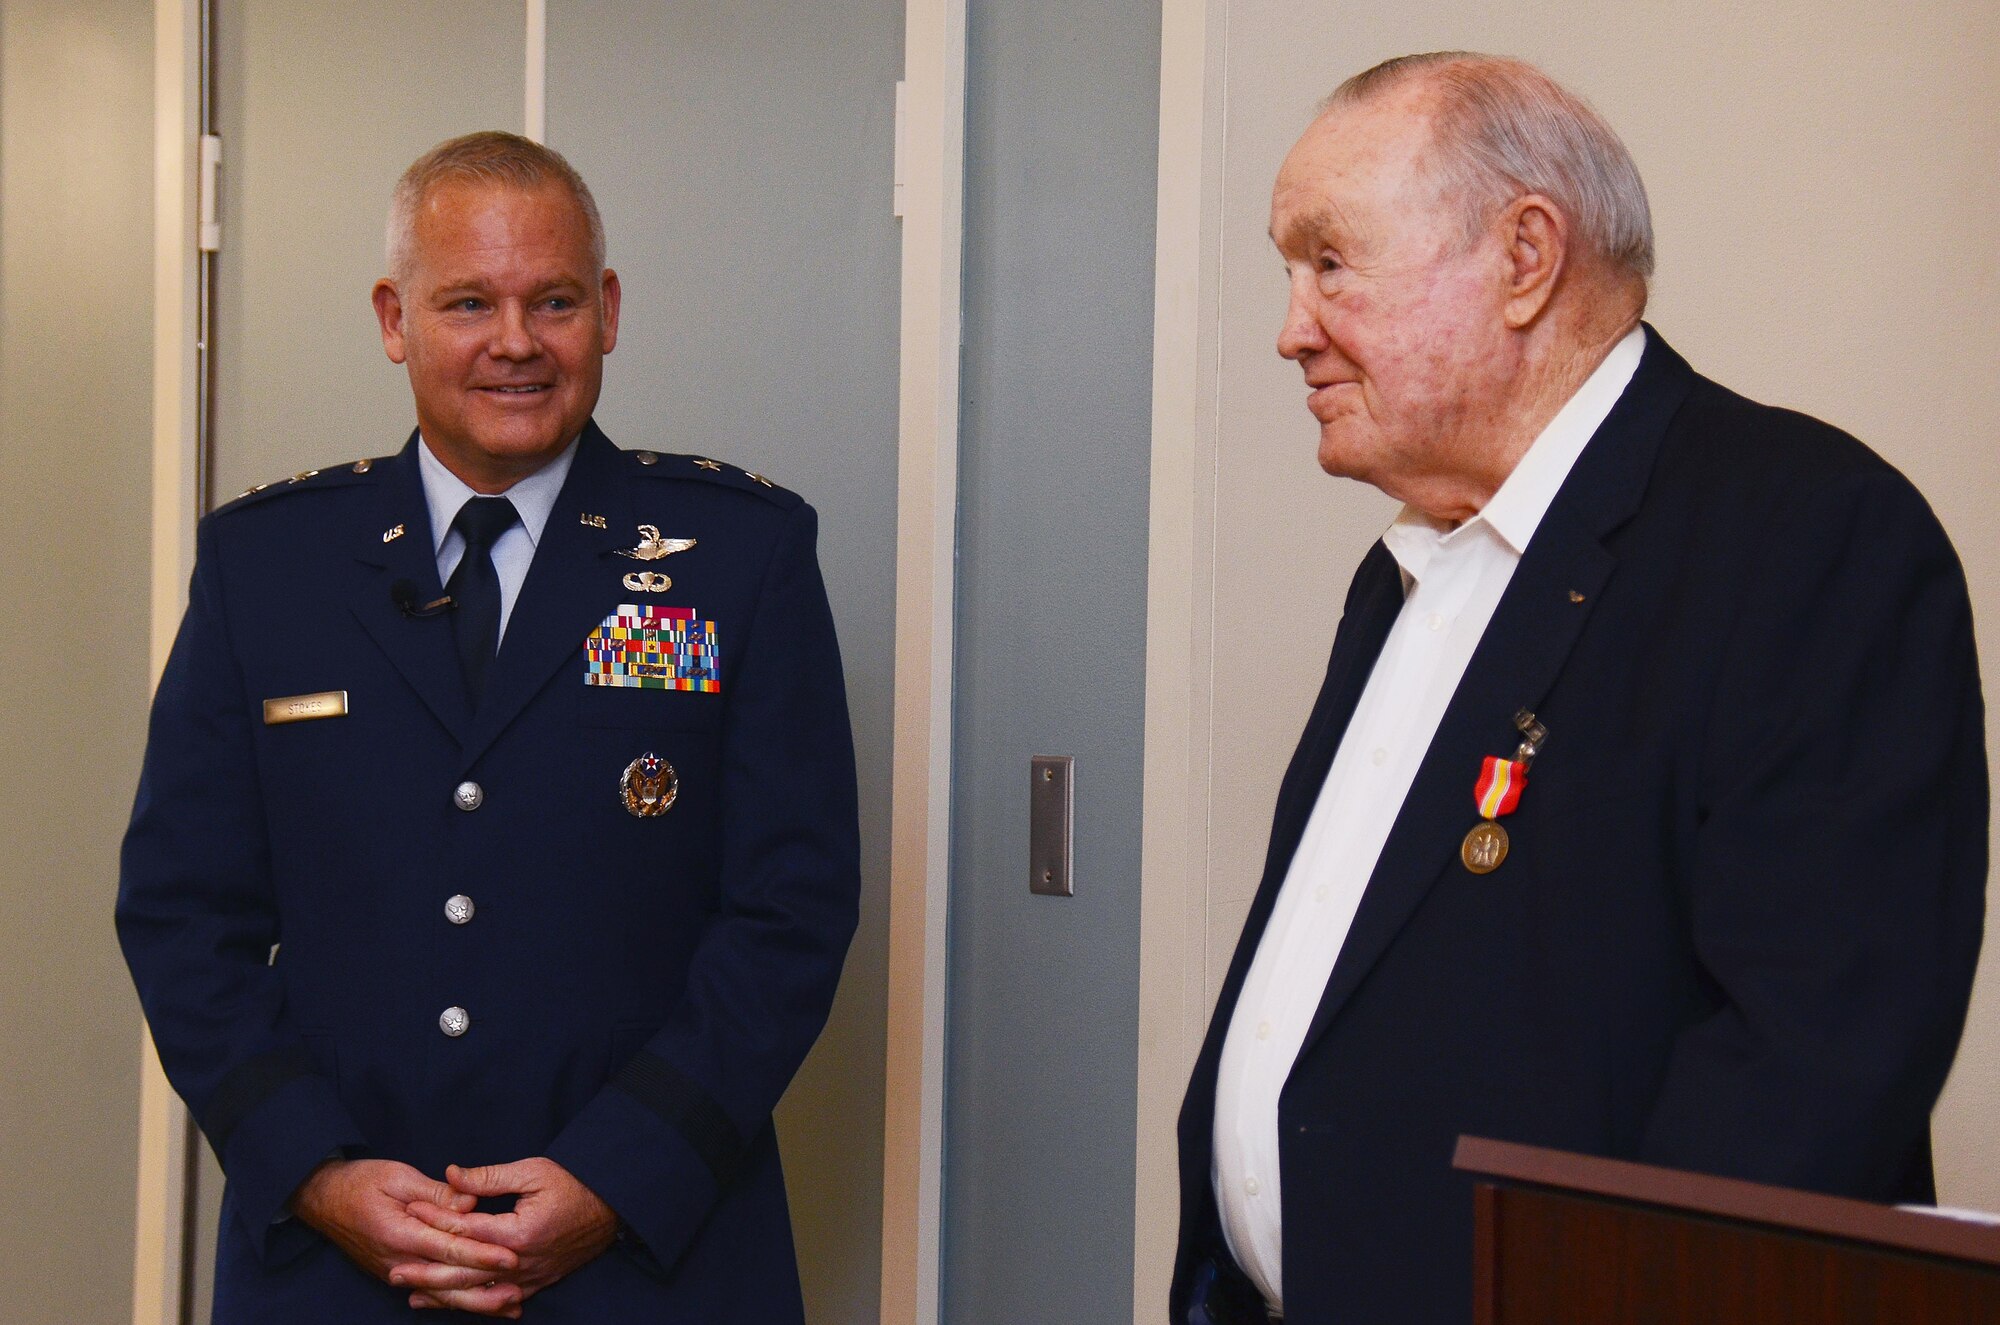 Maj. Gen. John Stokes, 22nd Air Force commander from Dobbins Air Reserve Base, Ga., looks on after presenting the National Defense Service Medal to former U.S. Air Force Capt. Stewart Graham for his service in the Korean War. Graham received the medal on Nov. 28, 2016 in the presence of family and friends 60 years after it was authorized. (U.S. Air Force photo/Don Peek)